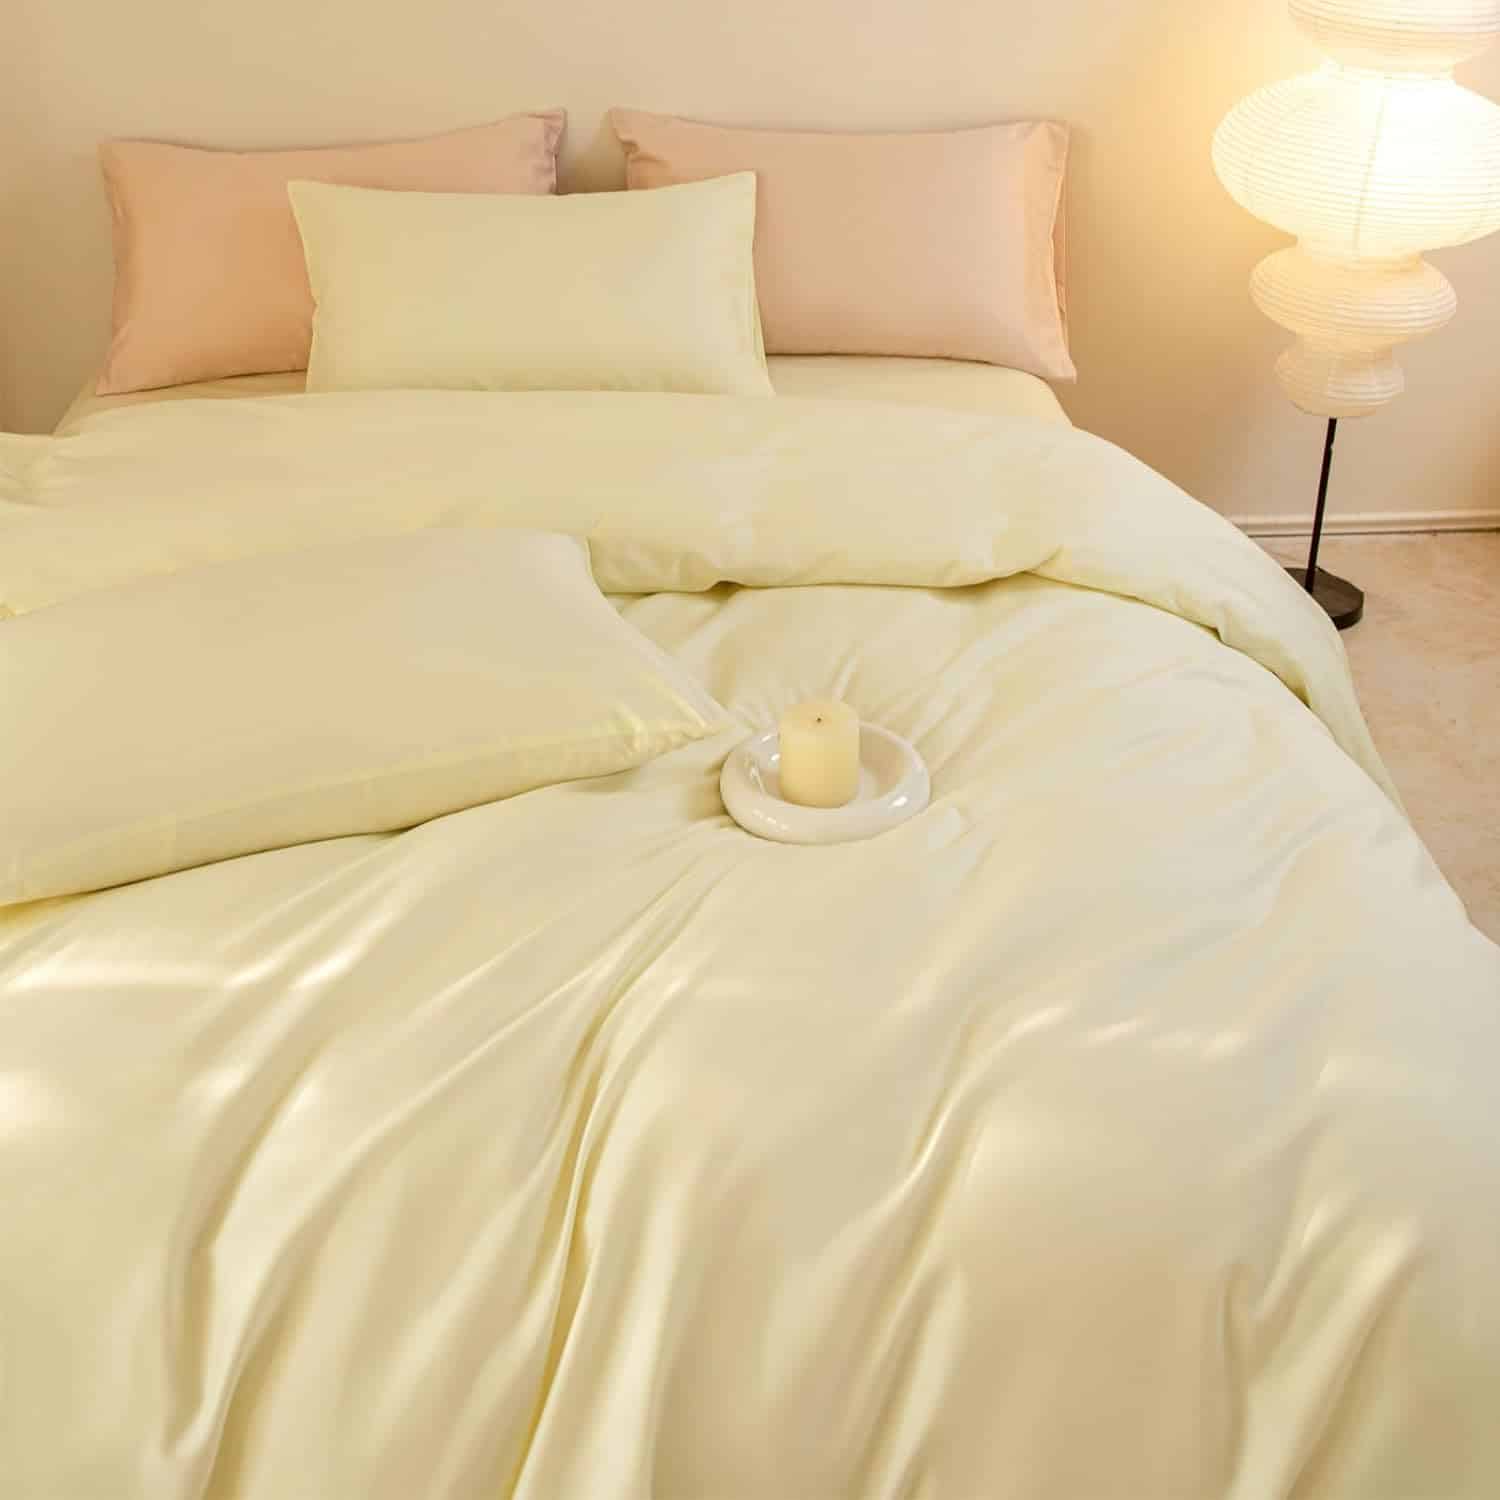 Experience Ultimate Comfort with the BIYOZER Duvet Cover Queen 100% Long Staple Cotton Set